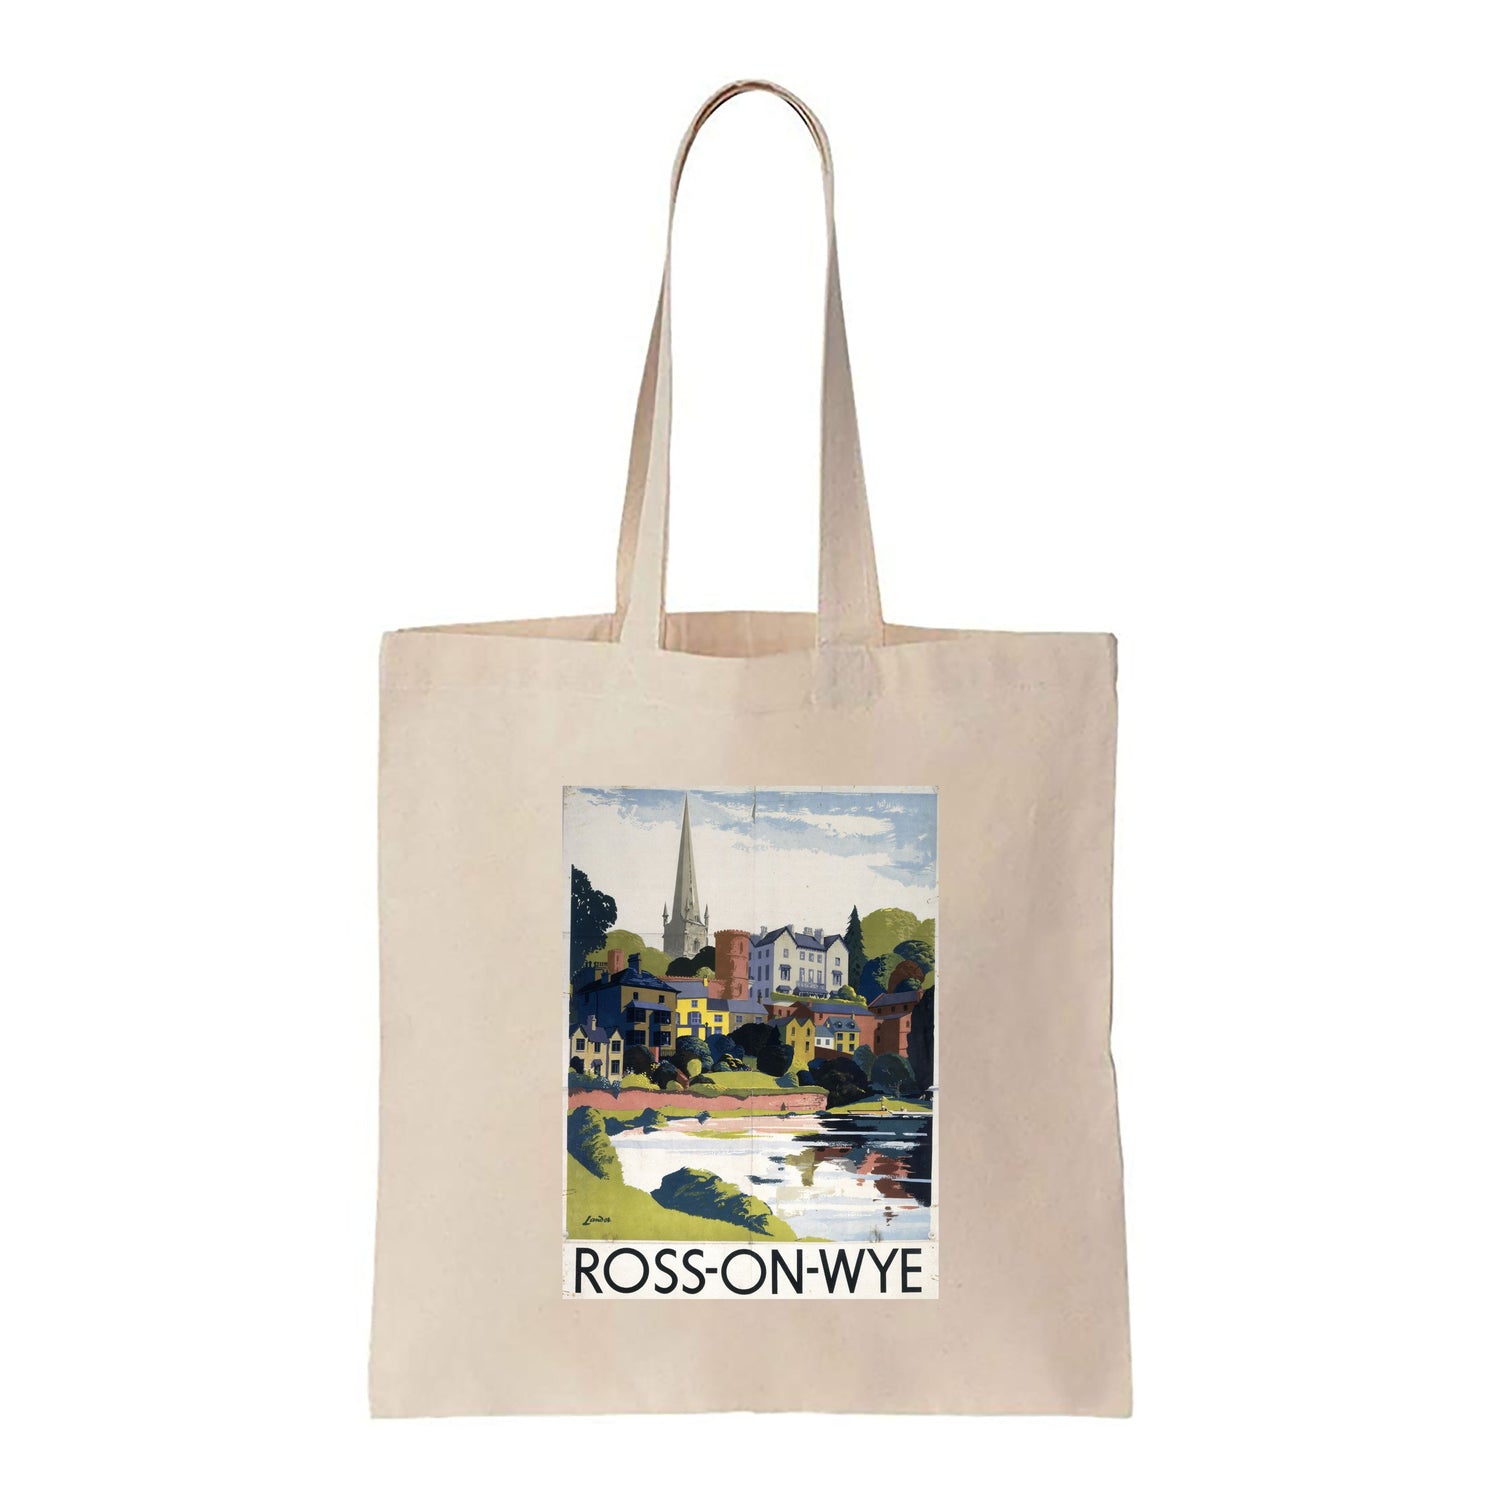 Ross-on-Wye - Canvas Tote Bag